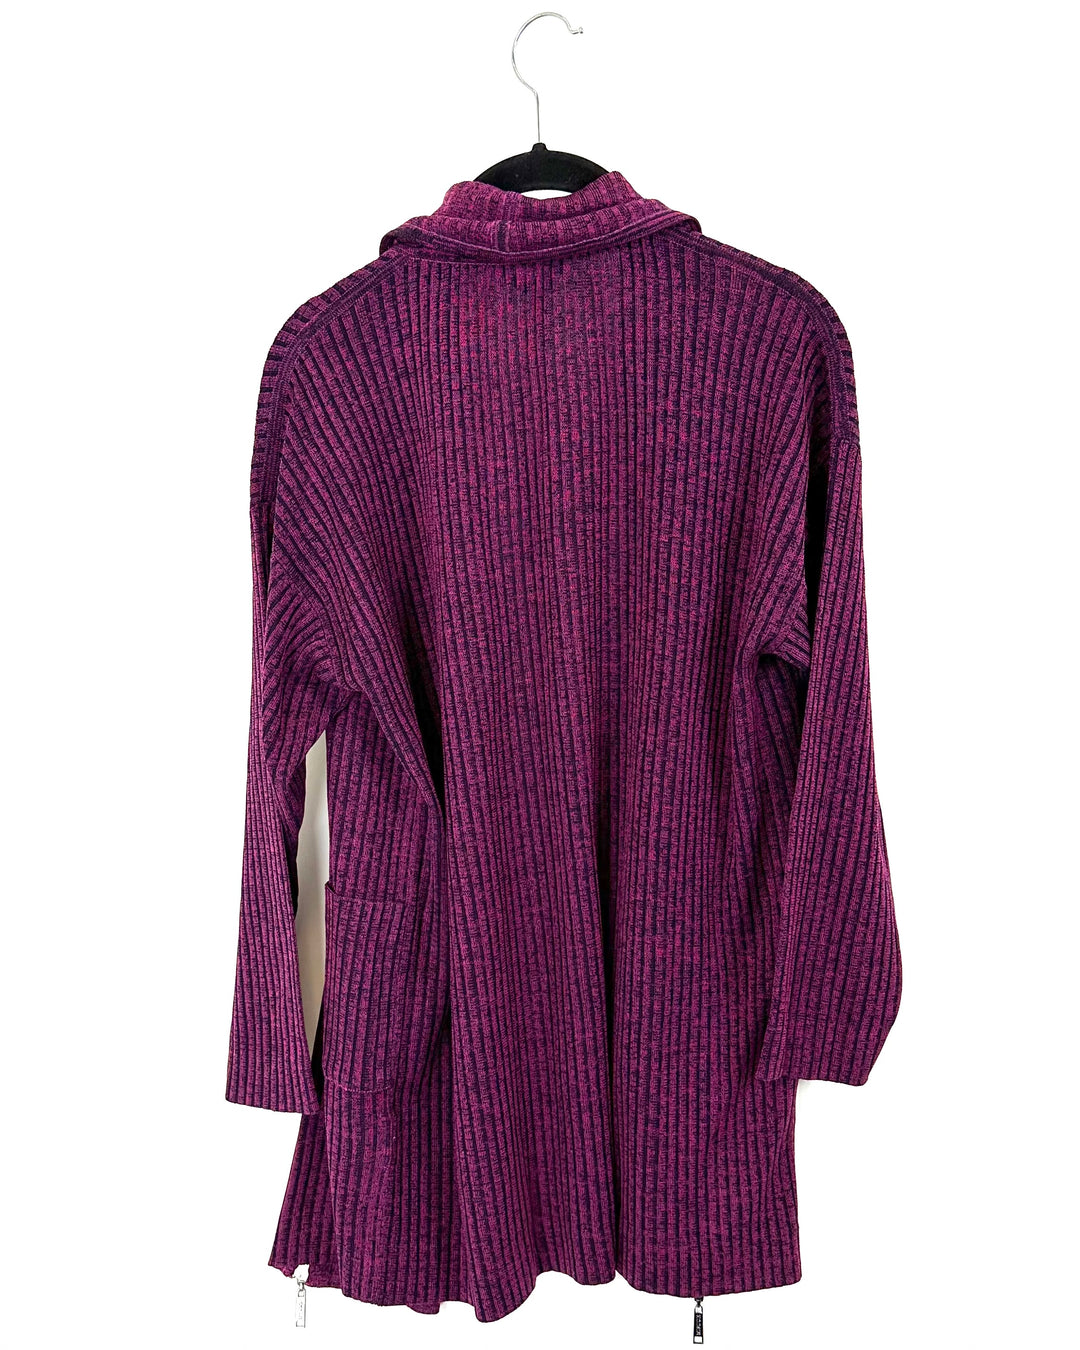 Purple And Pink Cardigan - Size 0-2